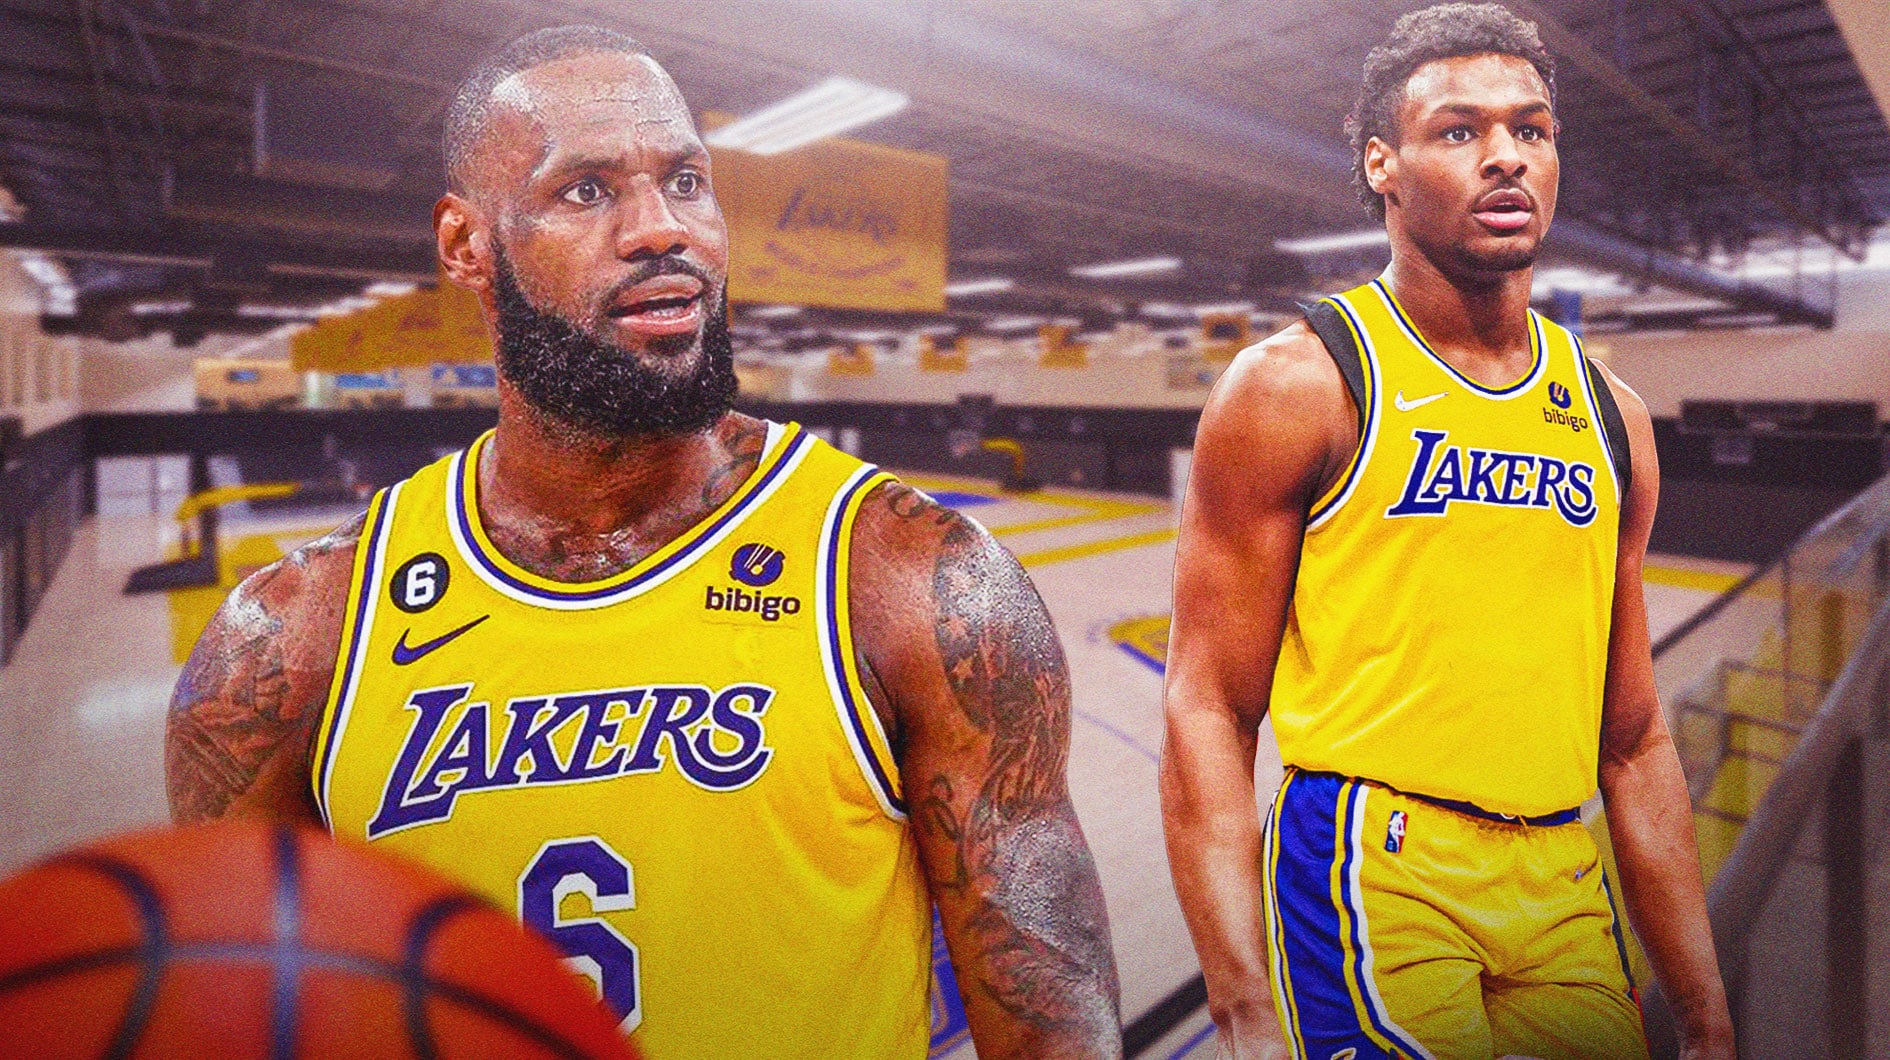 lakers-news-lebron-james-bronny-james-los-angeles-pairing-receives-eye-opening-take-from-cavs-writer